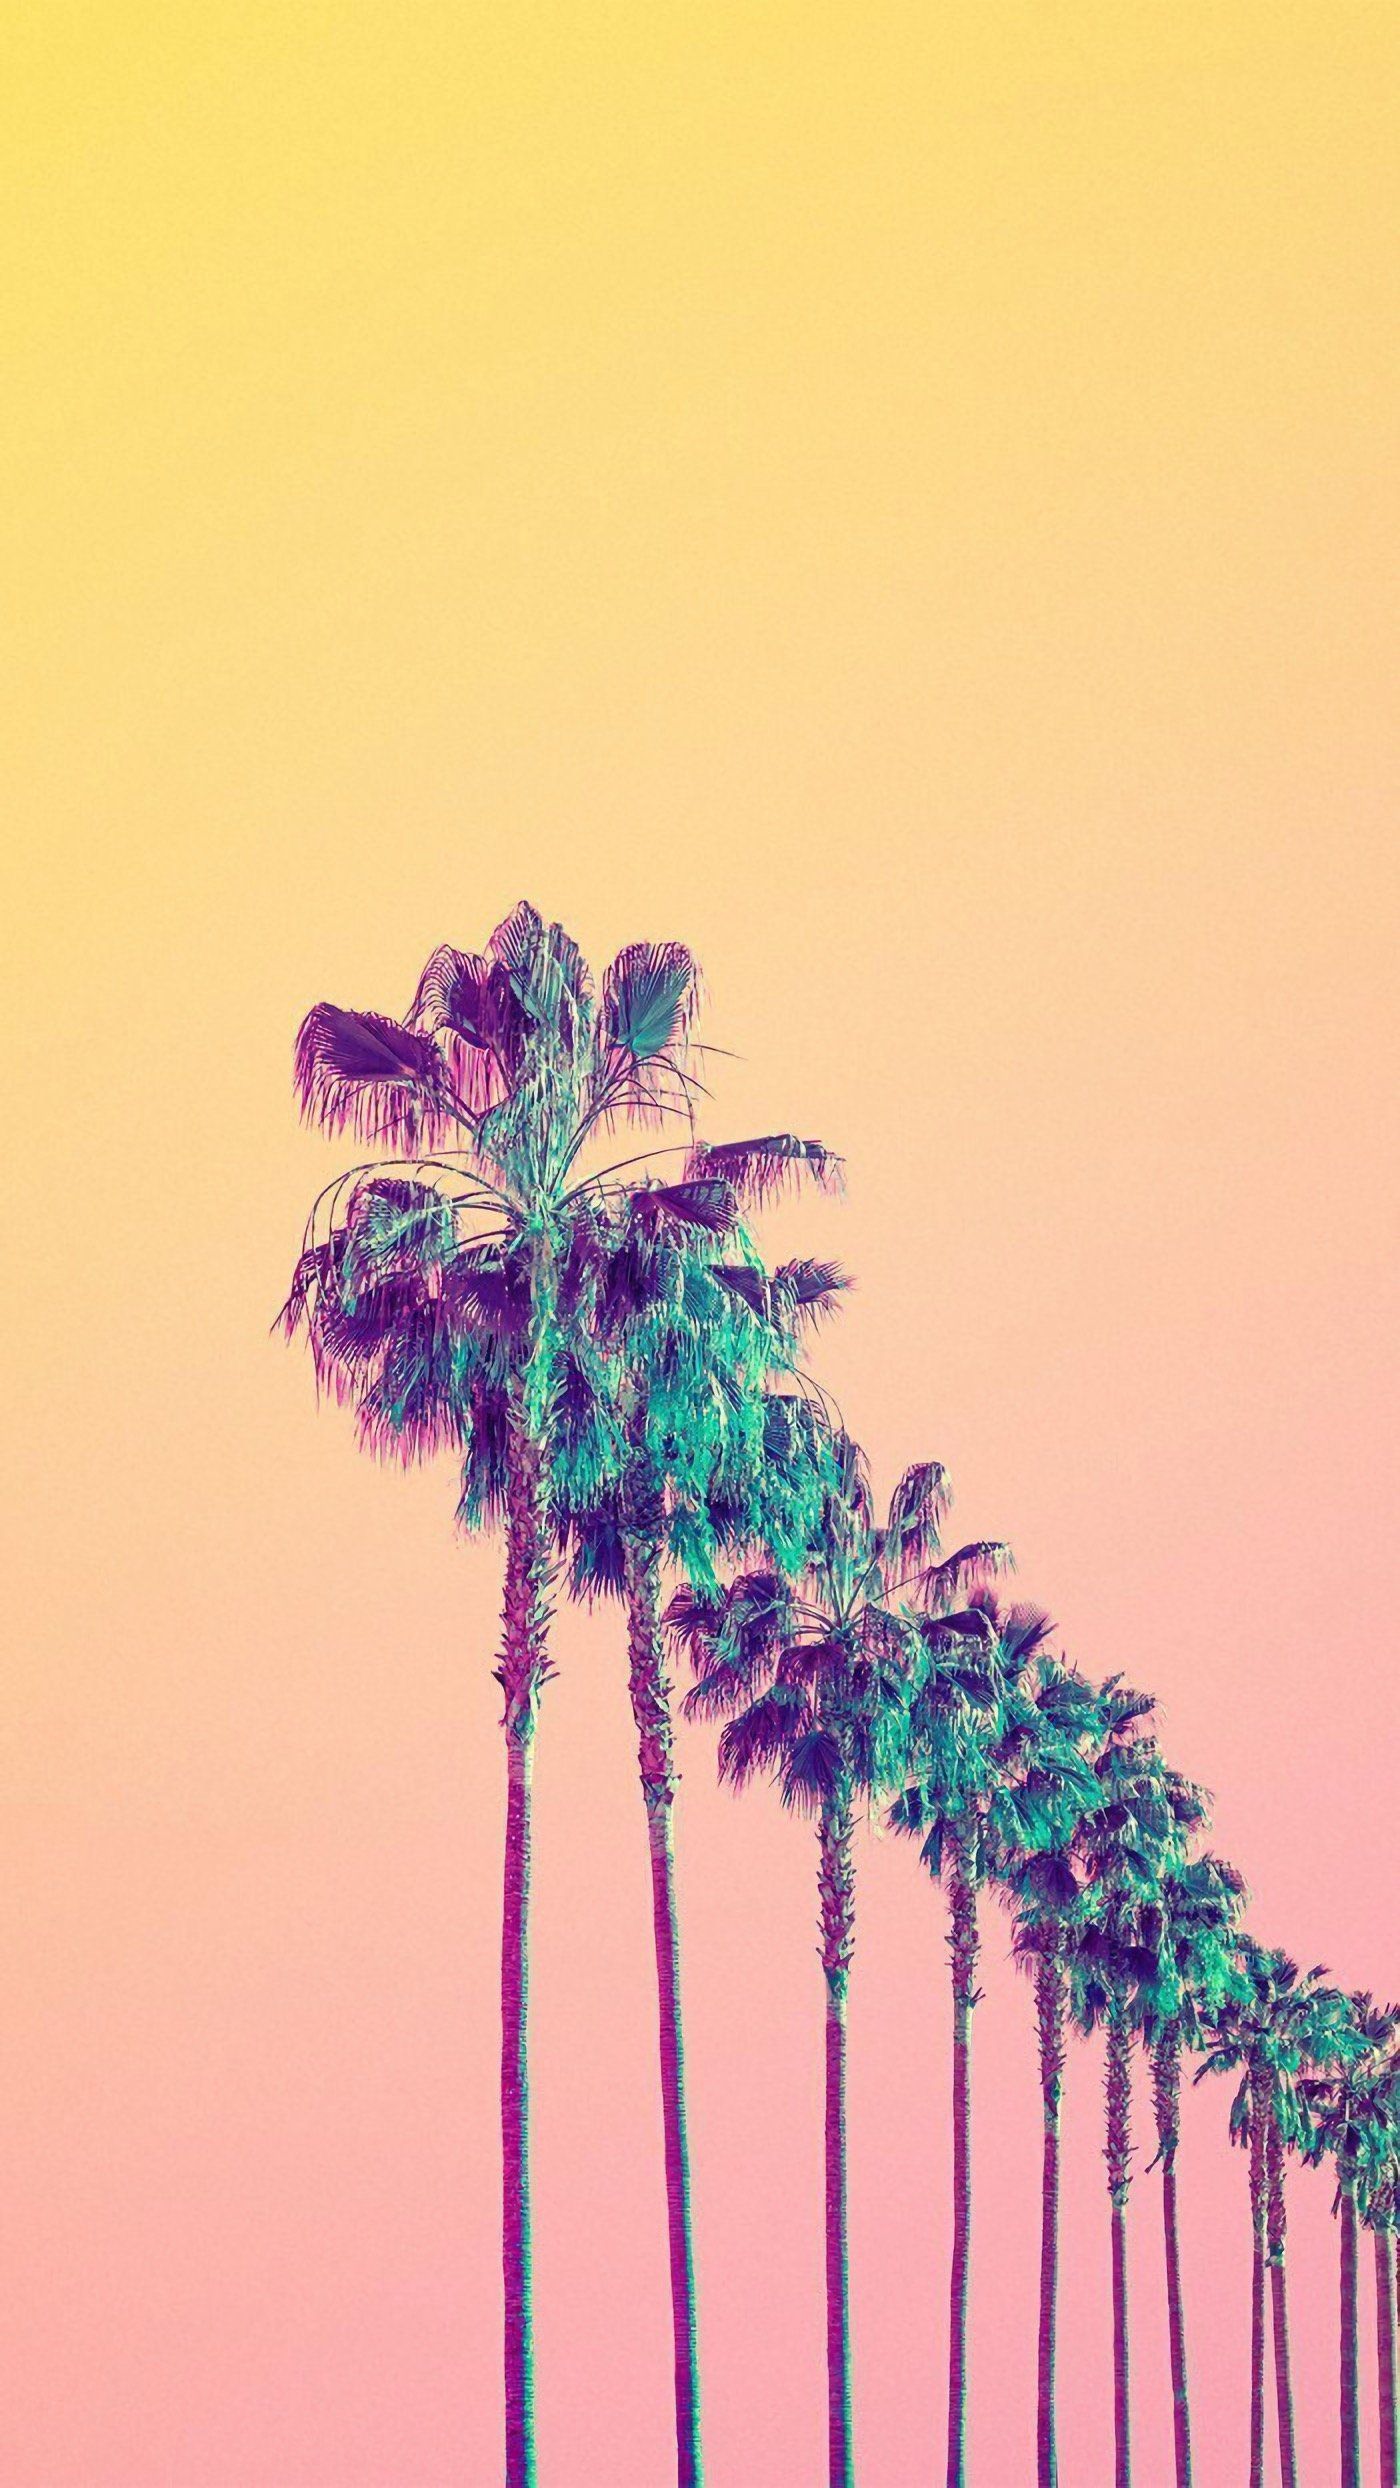 A wallpaper of palm trees with a yellow and pink background - IPhone, modern, cross, palm tree, California